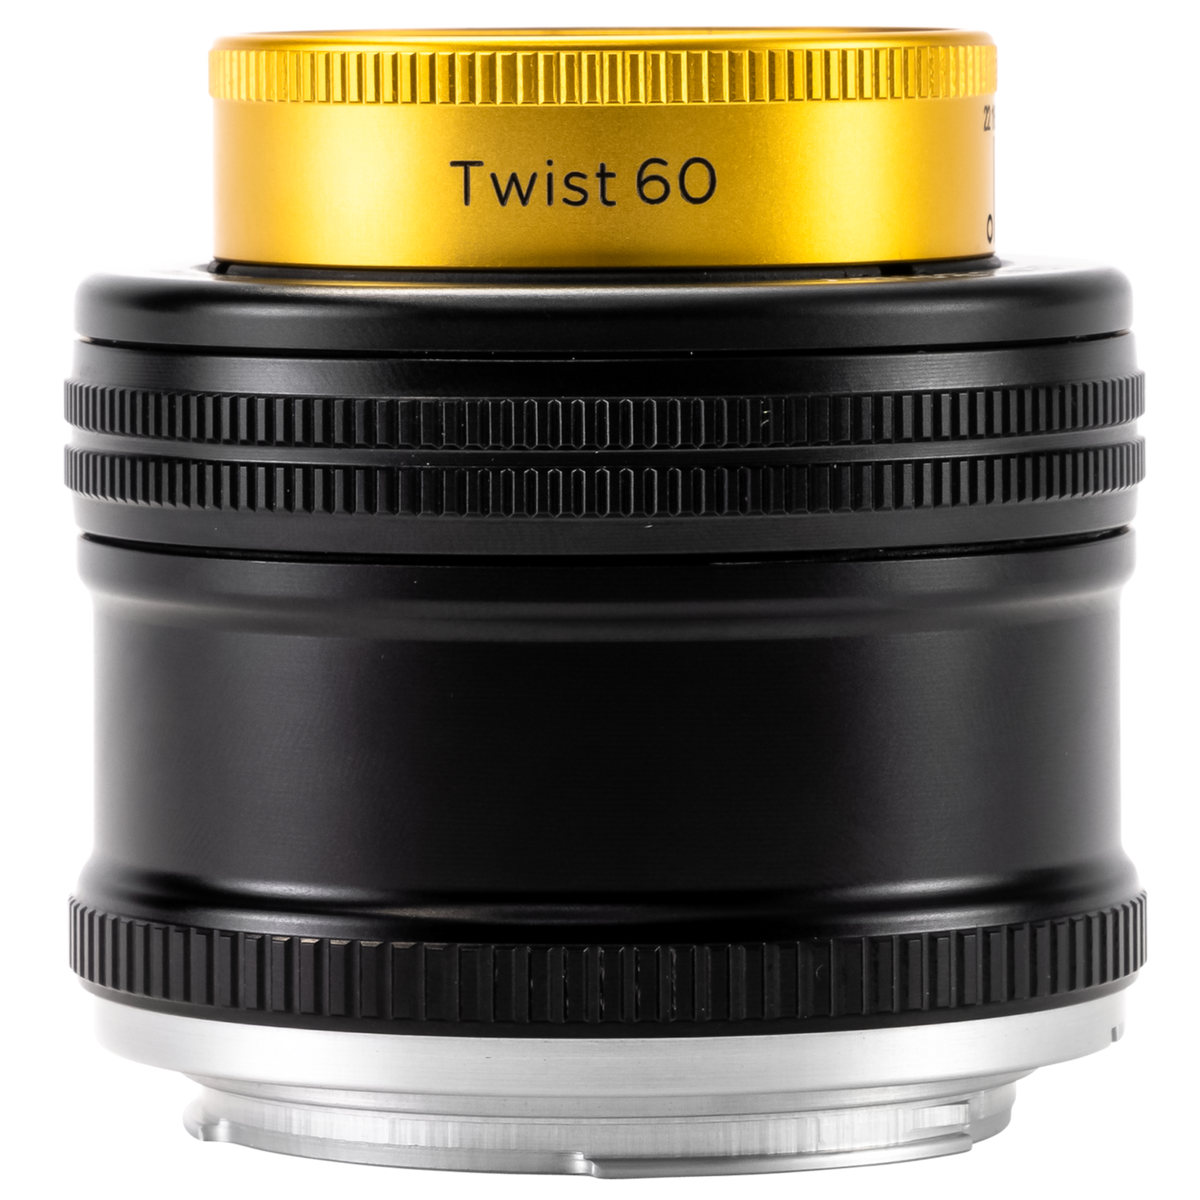 Twist 60 | Camera Lens With Swirl Effect | Lensbaby